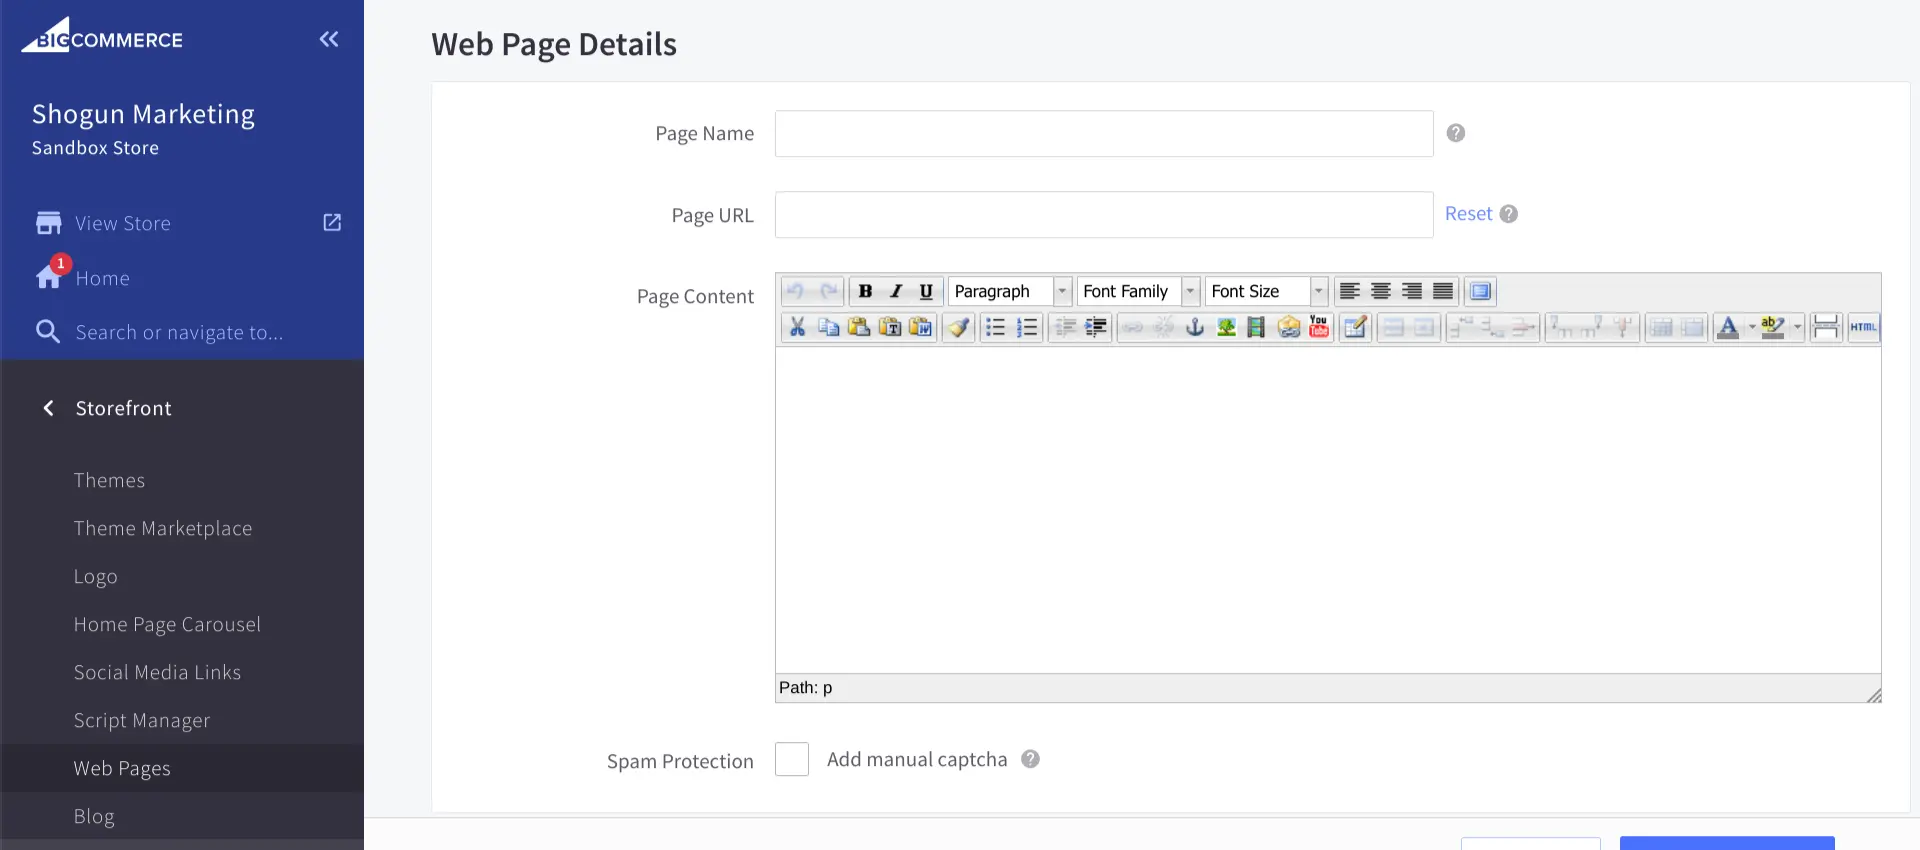 You can use BigCommerce’s WYSIWYG editor to create content for a new page.